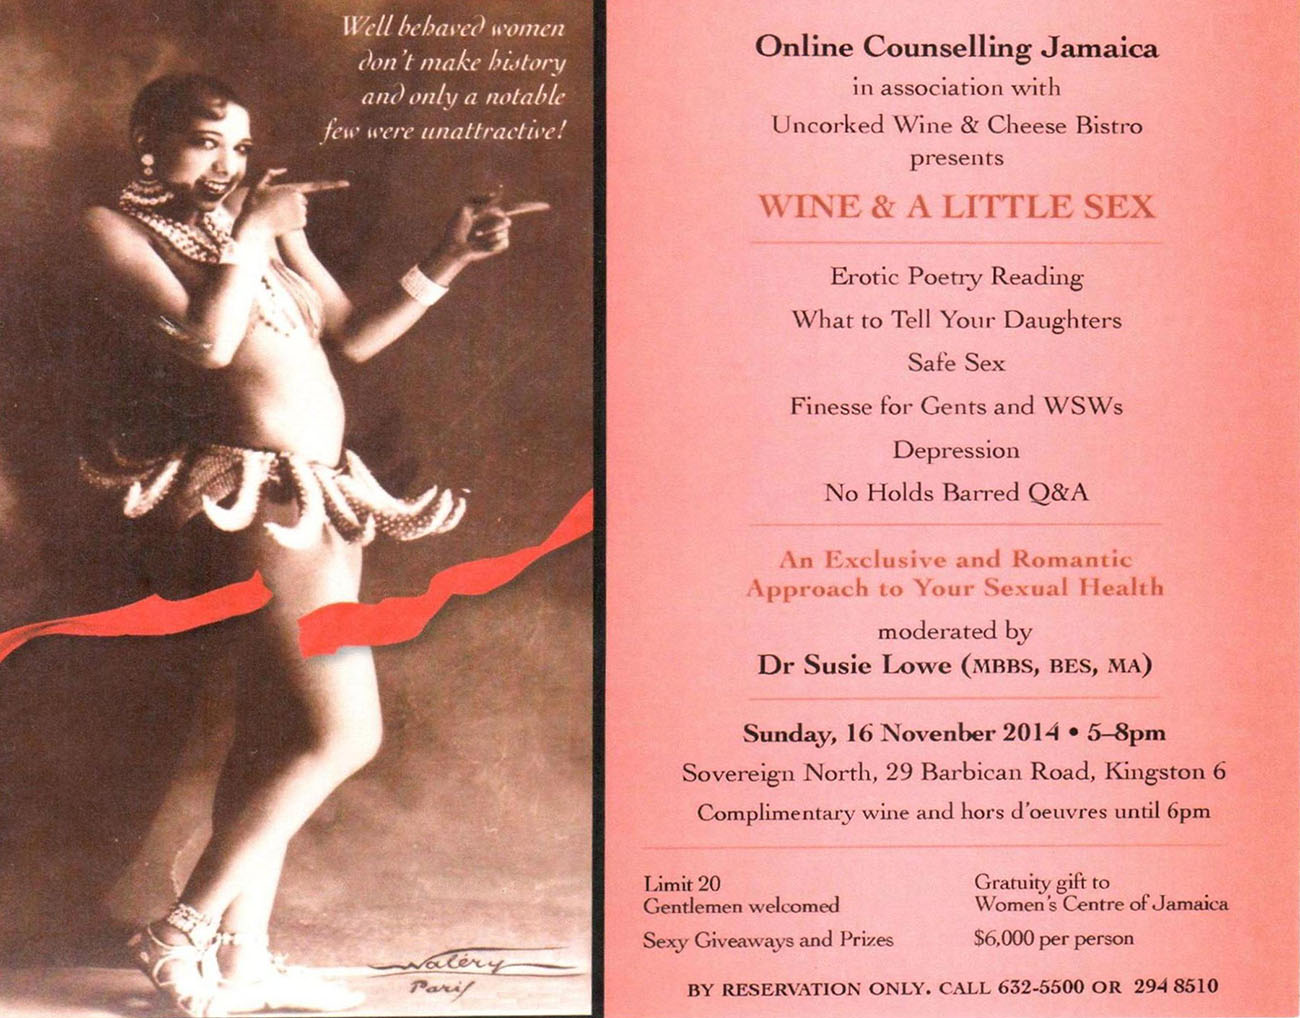 Digitalization plan in Jamaica. Health Travel. Wine and A little sex event.